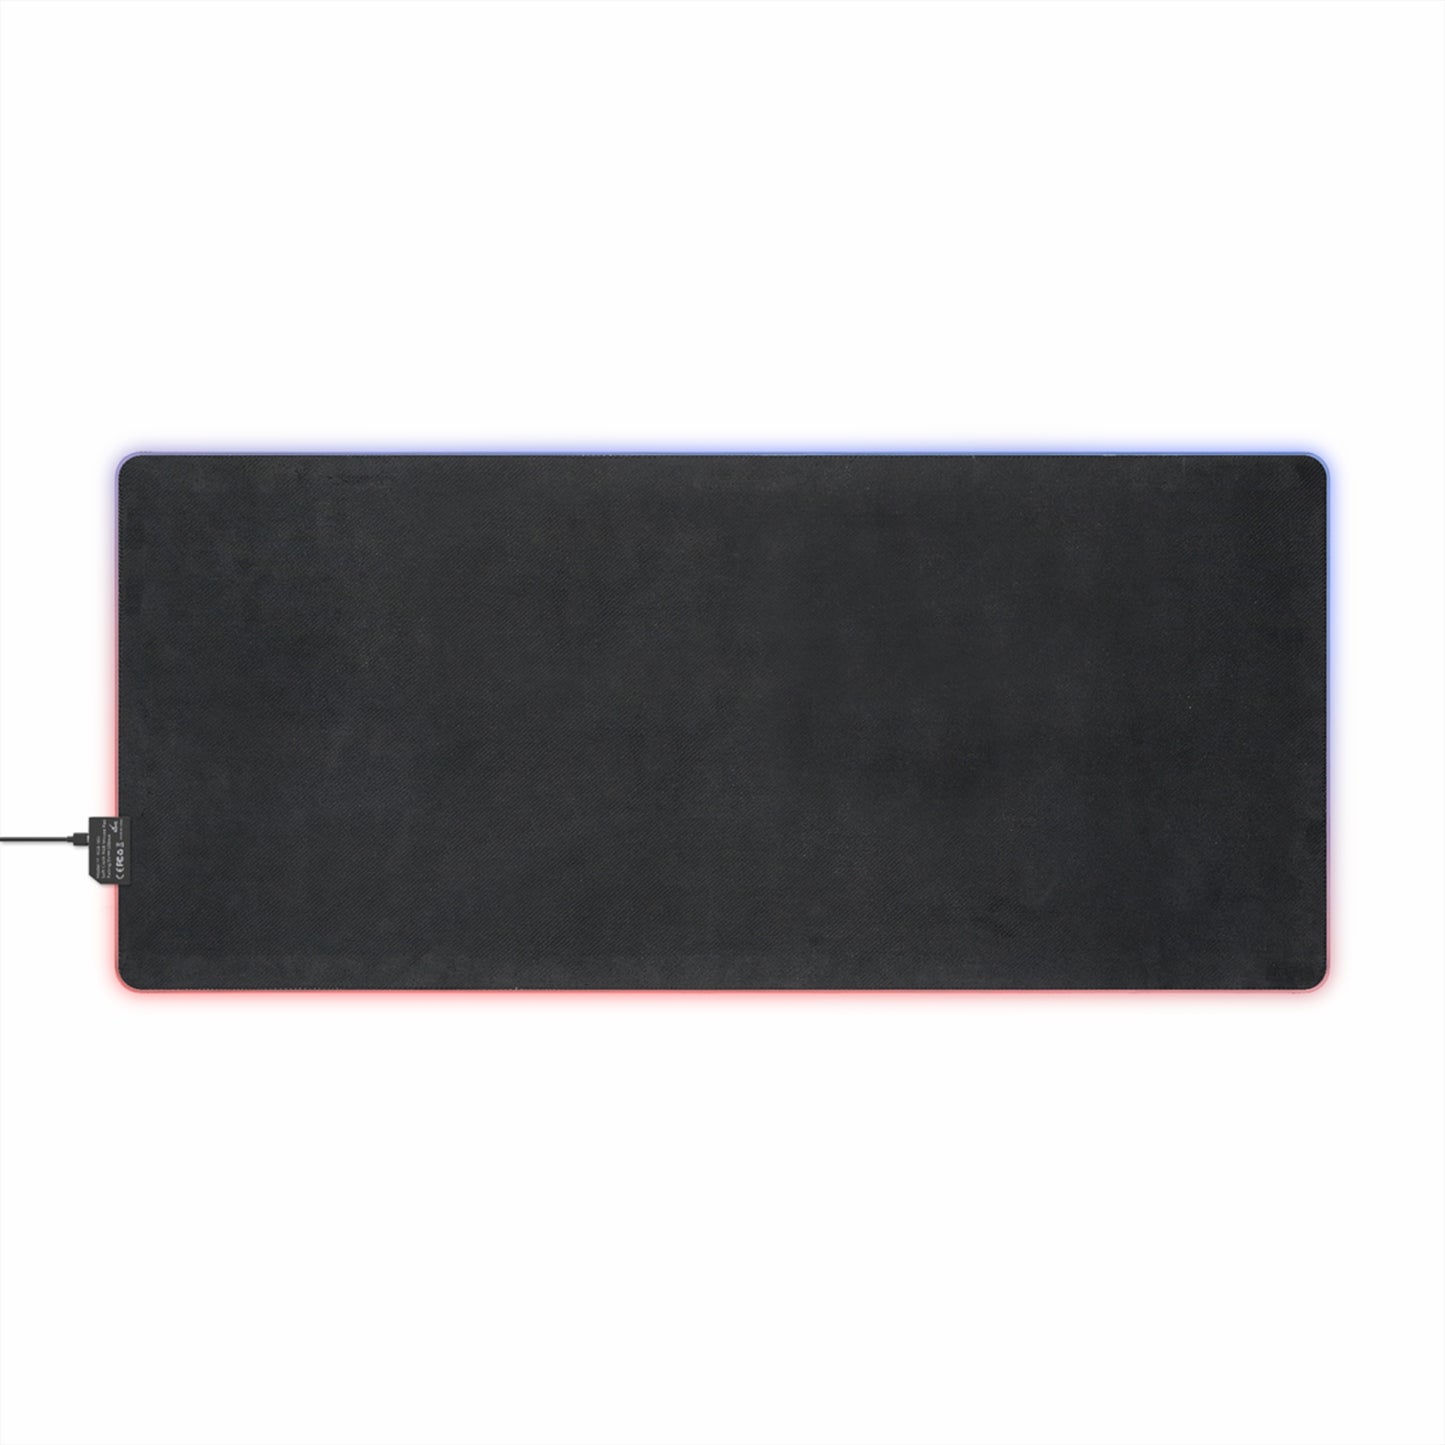 CLMP-10 LED Gaming Mouse Pad